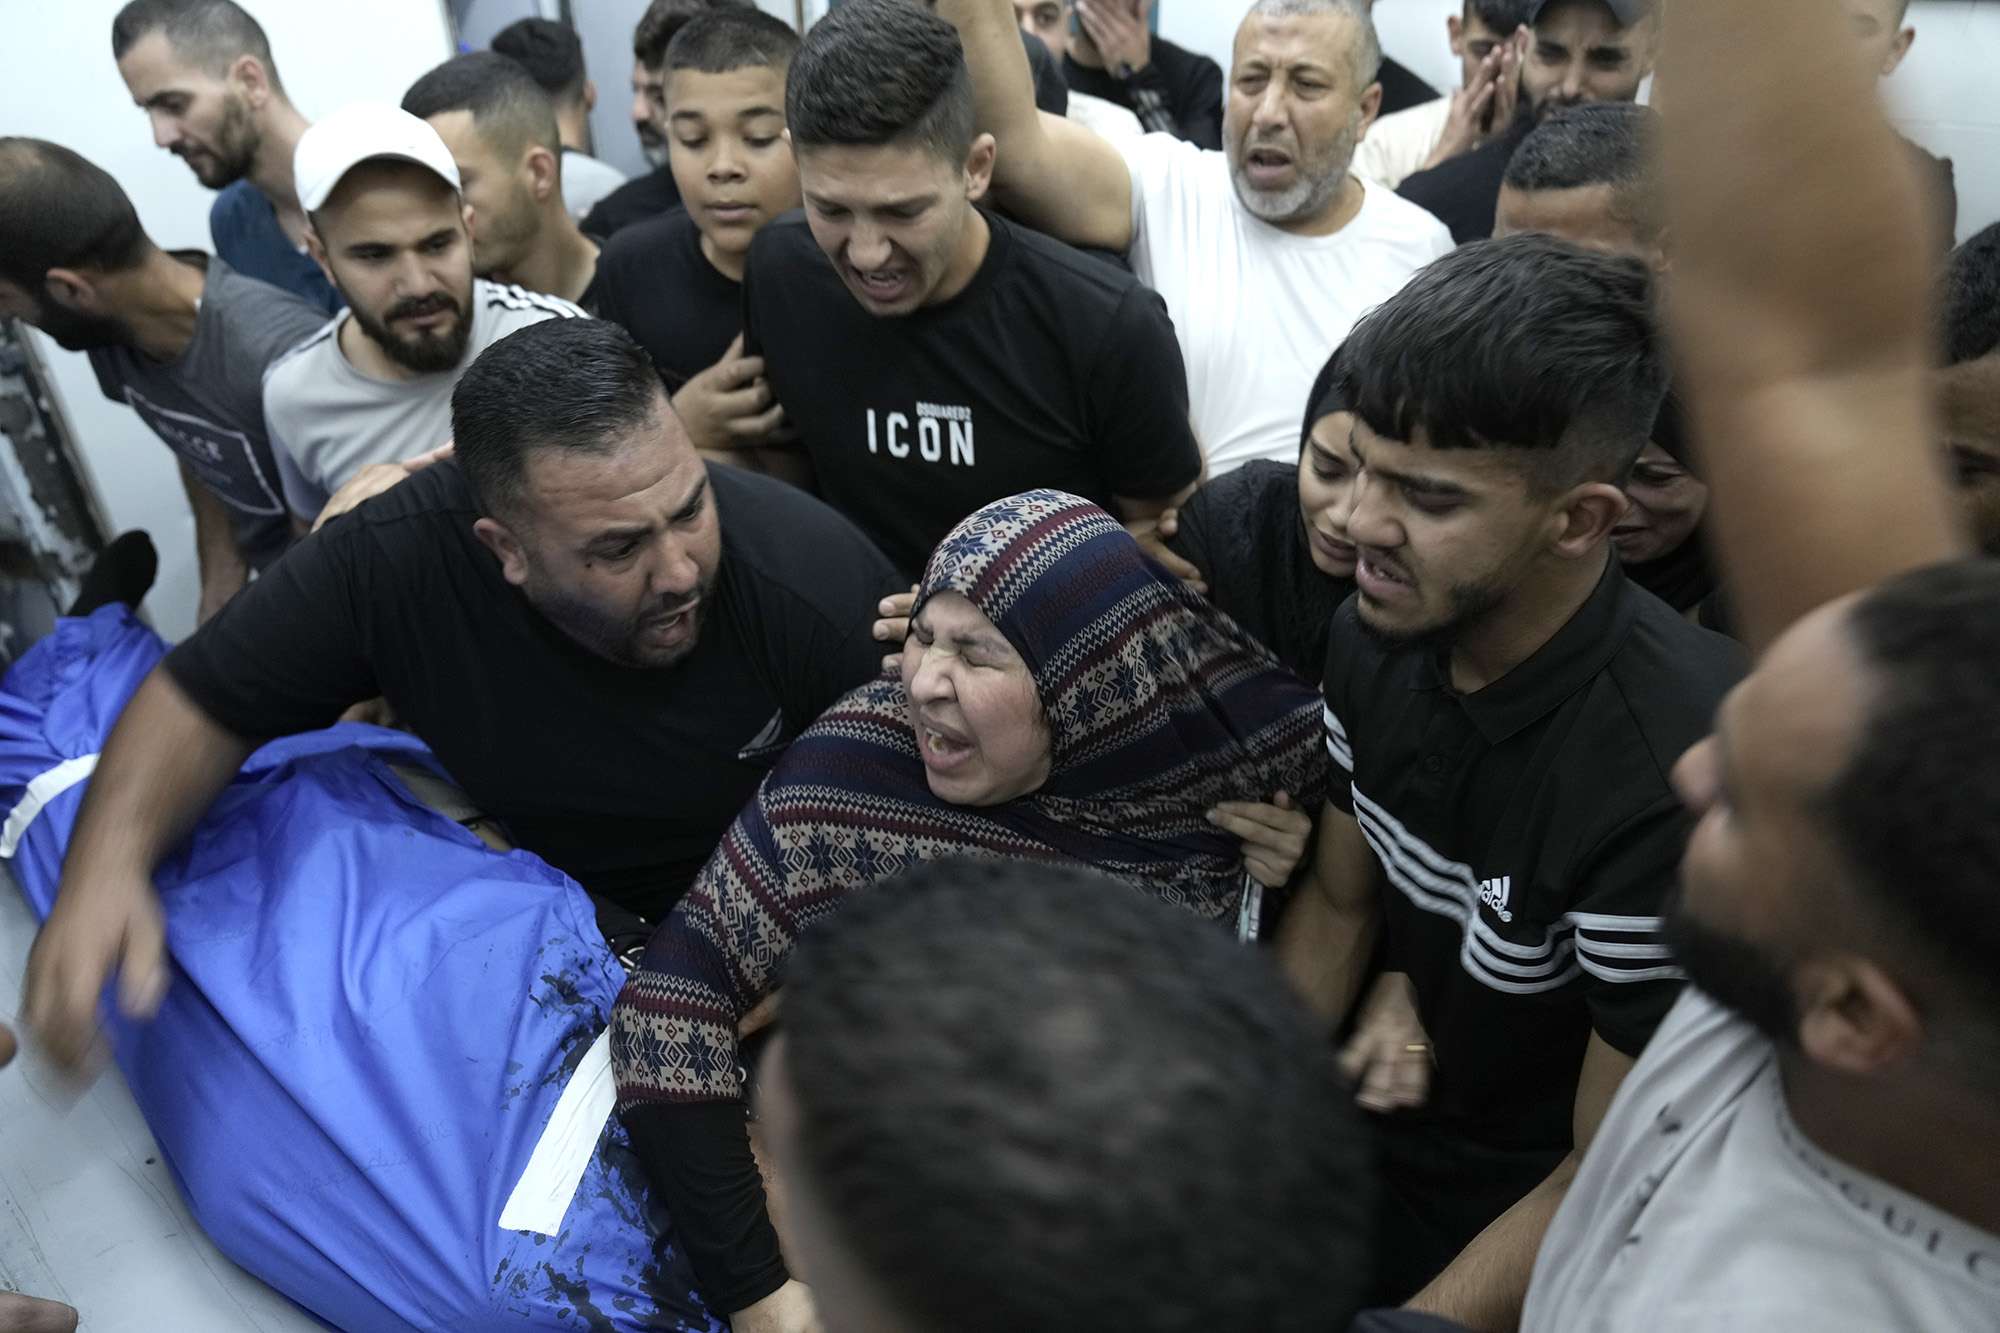 6 Palestinians killed in West Bank refugee camp, Palestinian health ministry says